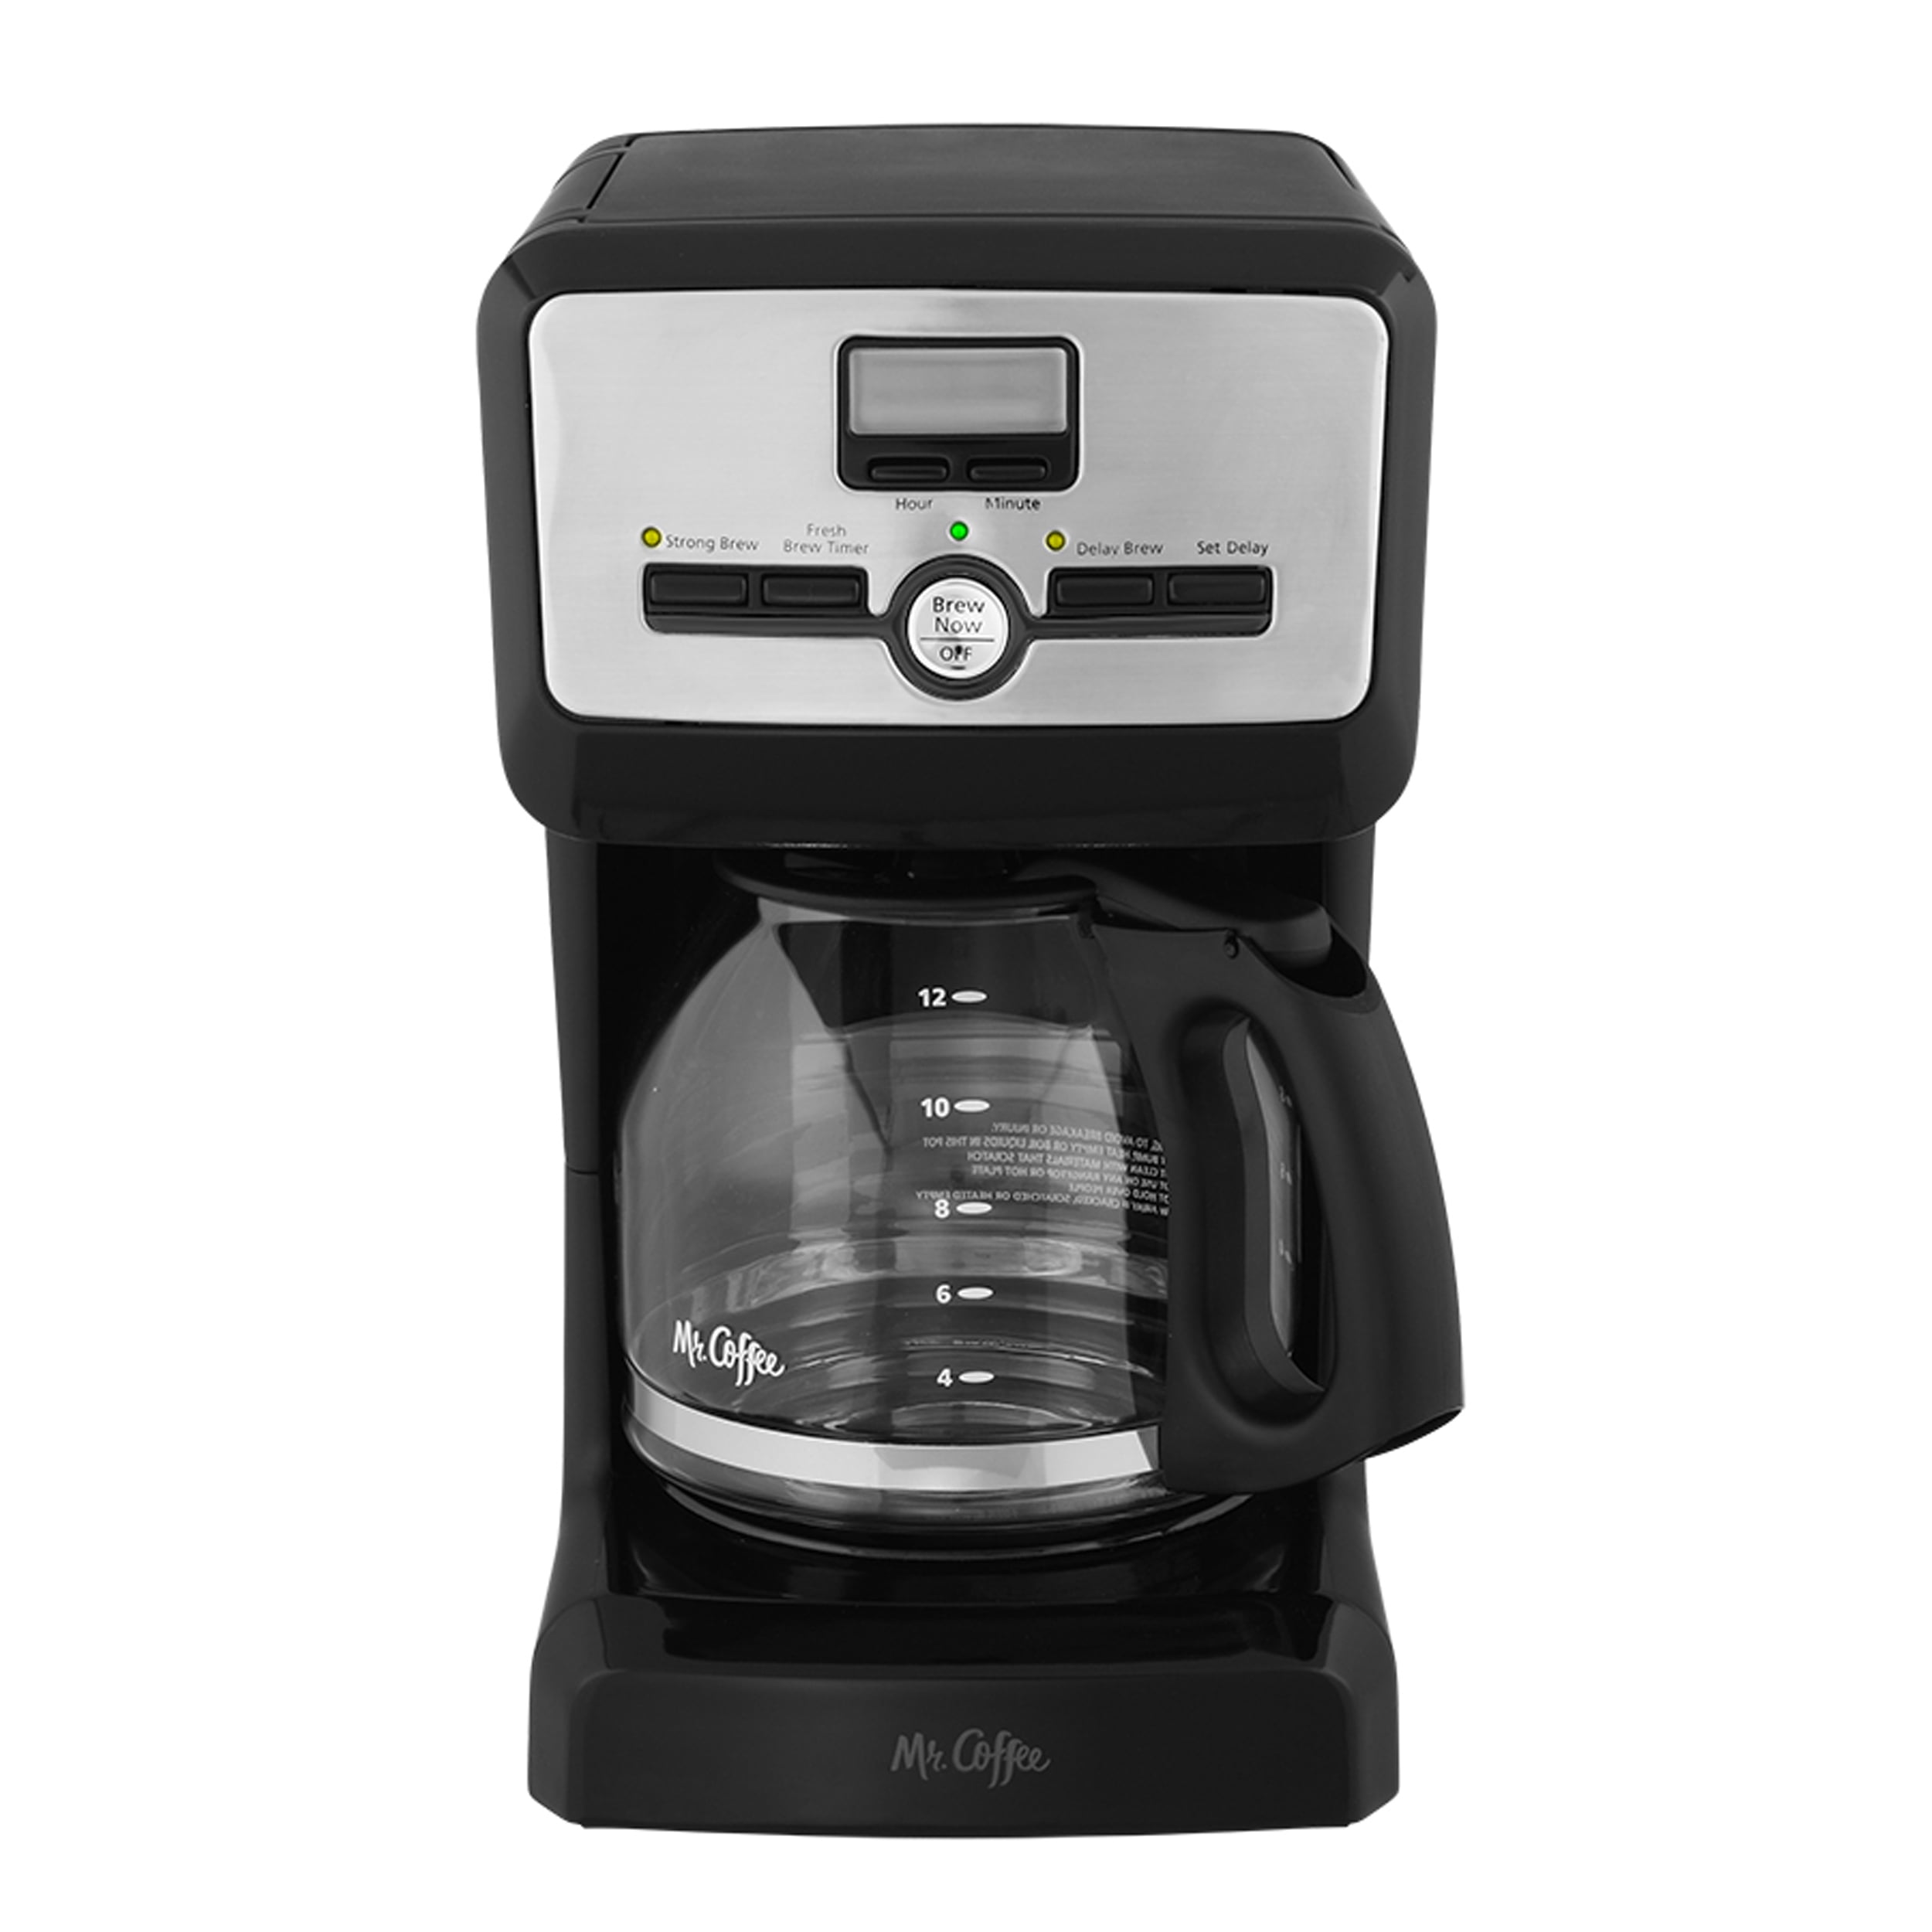 Coffee 12 Cup Programmable Coffee Maker Home Kitchen Timer Modern Black Mr